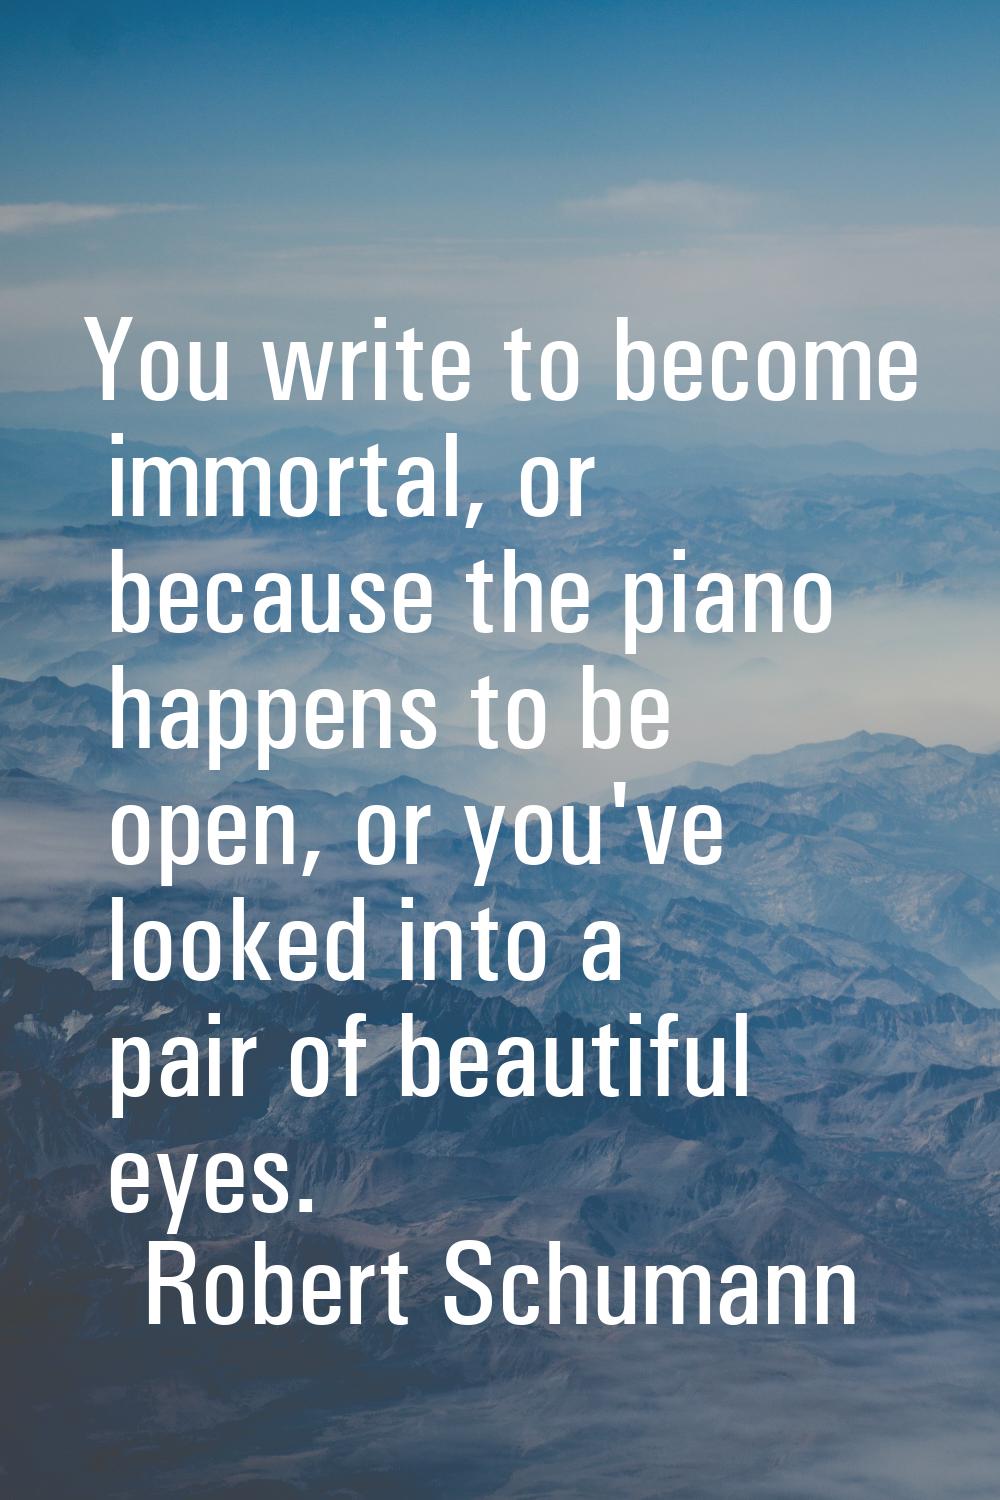 You write to become immortal, or because the piano happens to be open, or you've looked into a pair